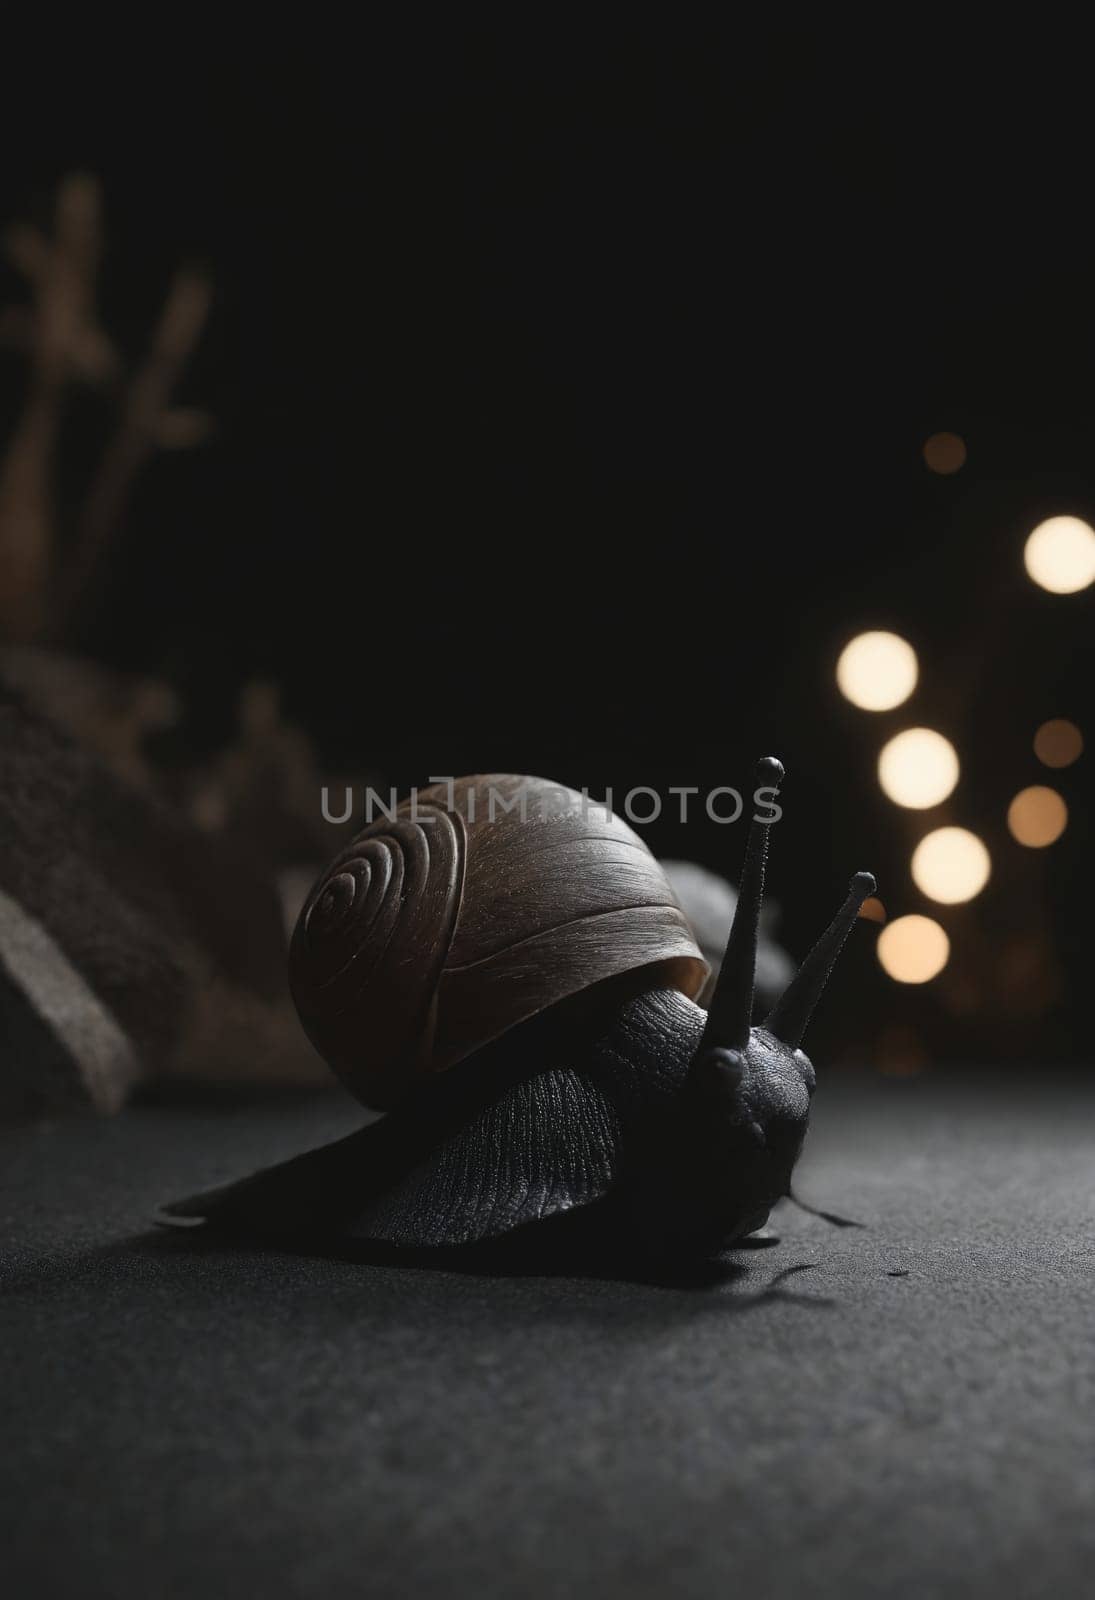 A lone snail embarks on a journey across a dark surface towards distant lights, a metaphor for determination.